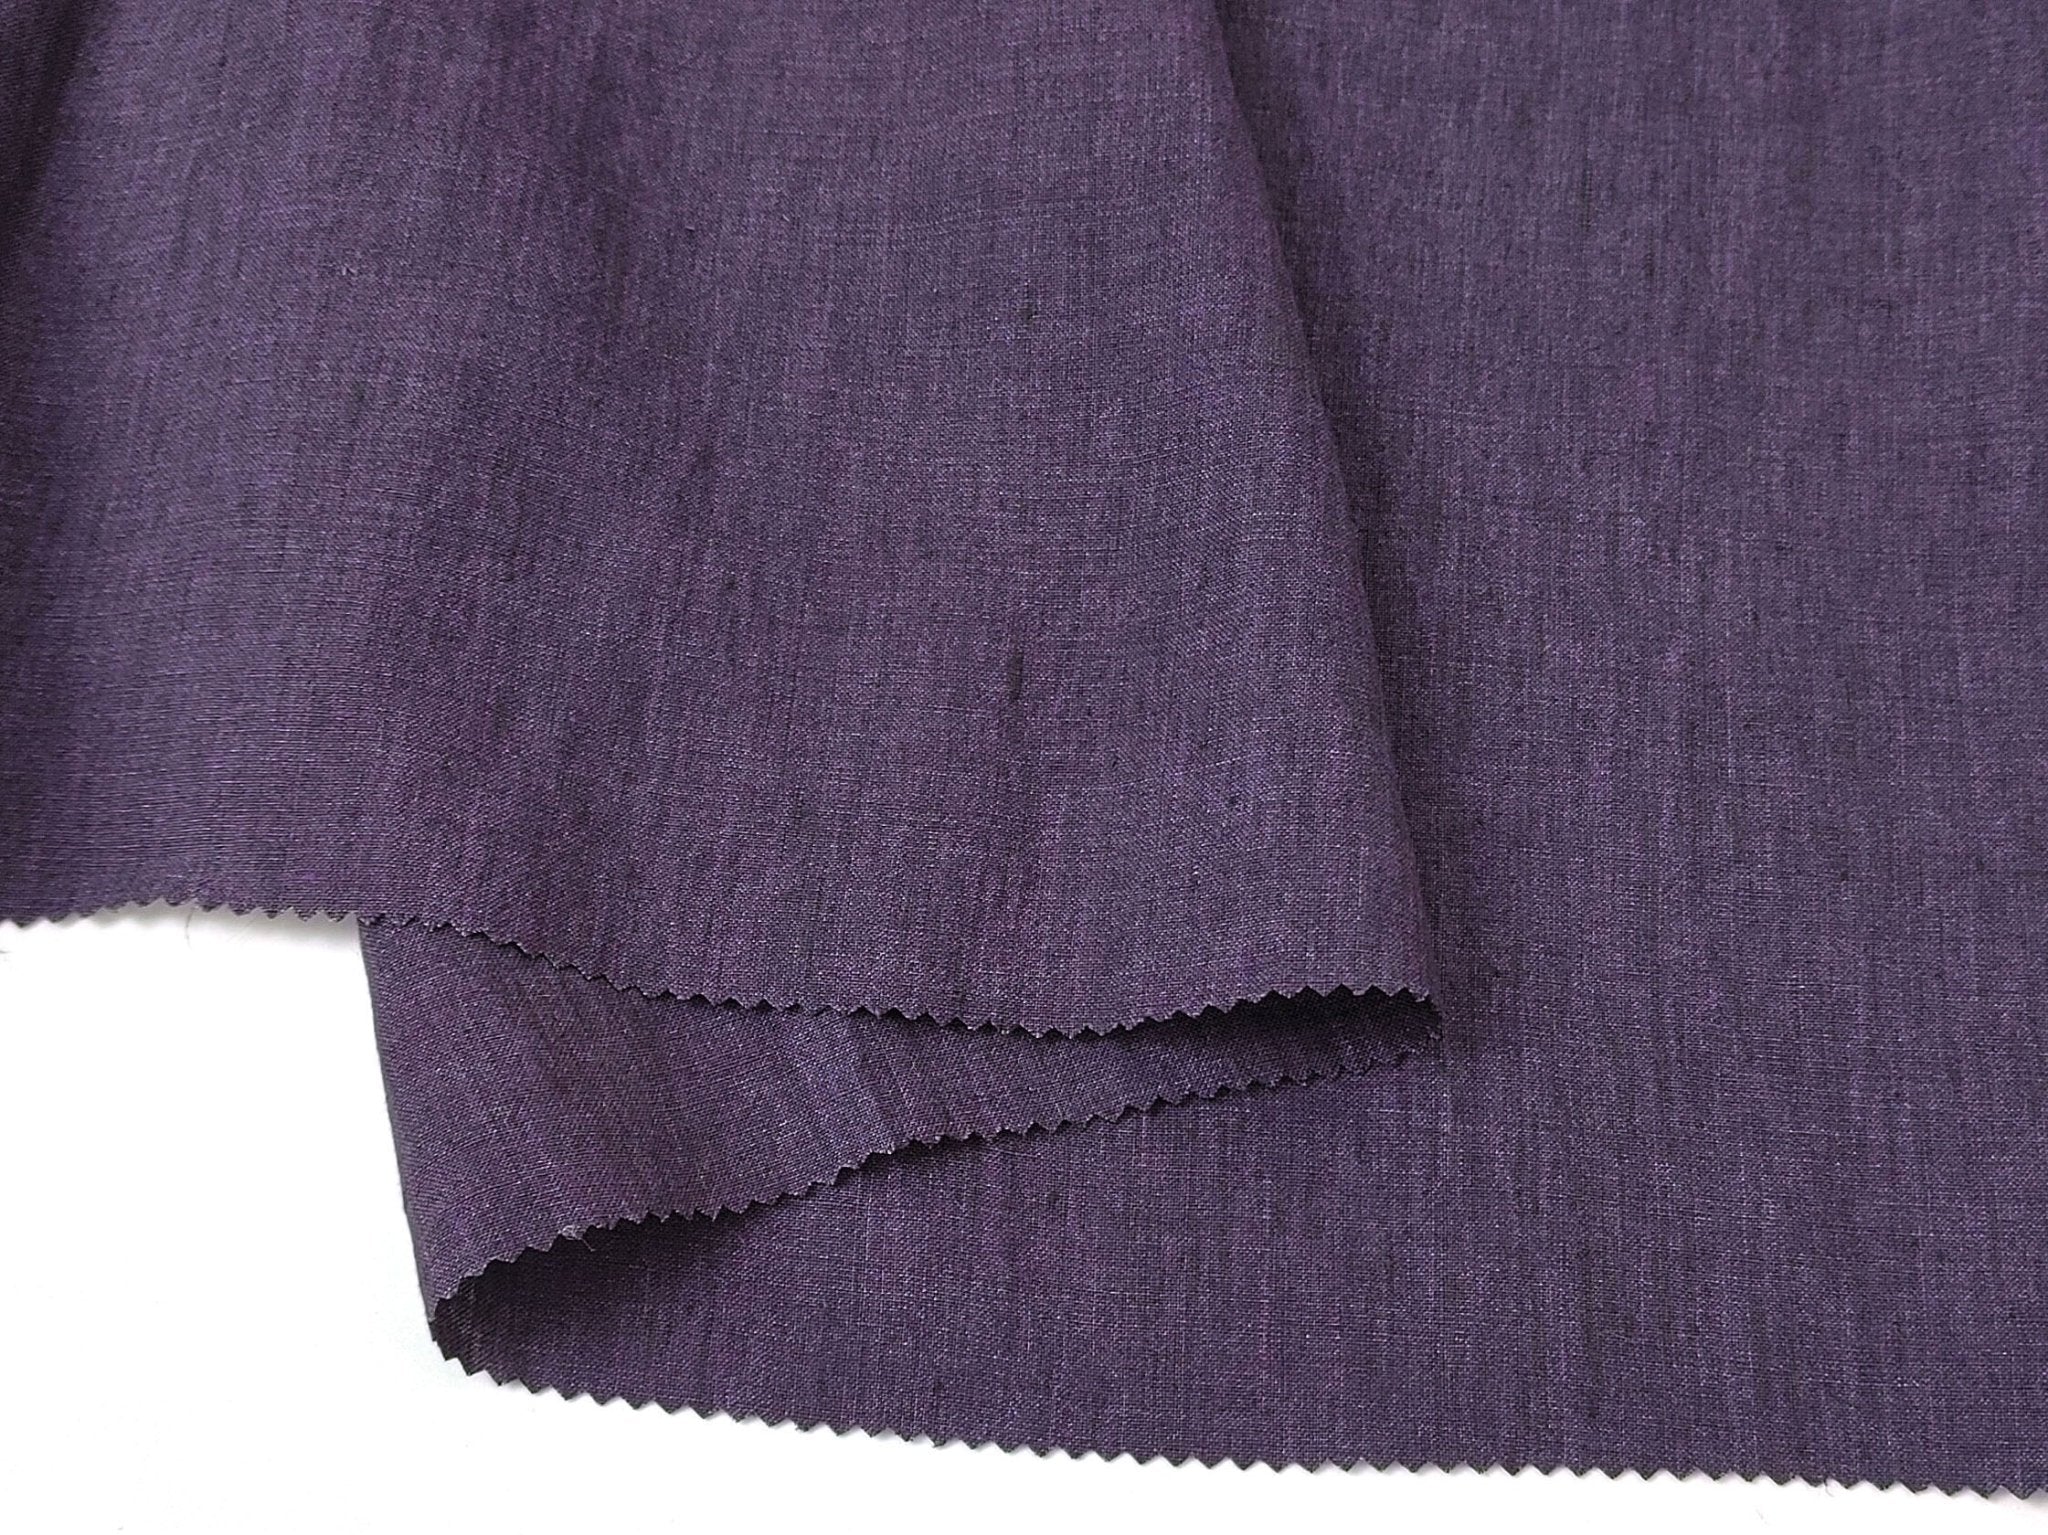 100% Linen Fabric: Delave High-Twisted Linen 14s, Medium Weight, New for 2024, 7712 7713 7682 - The Linen Lab - Violet